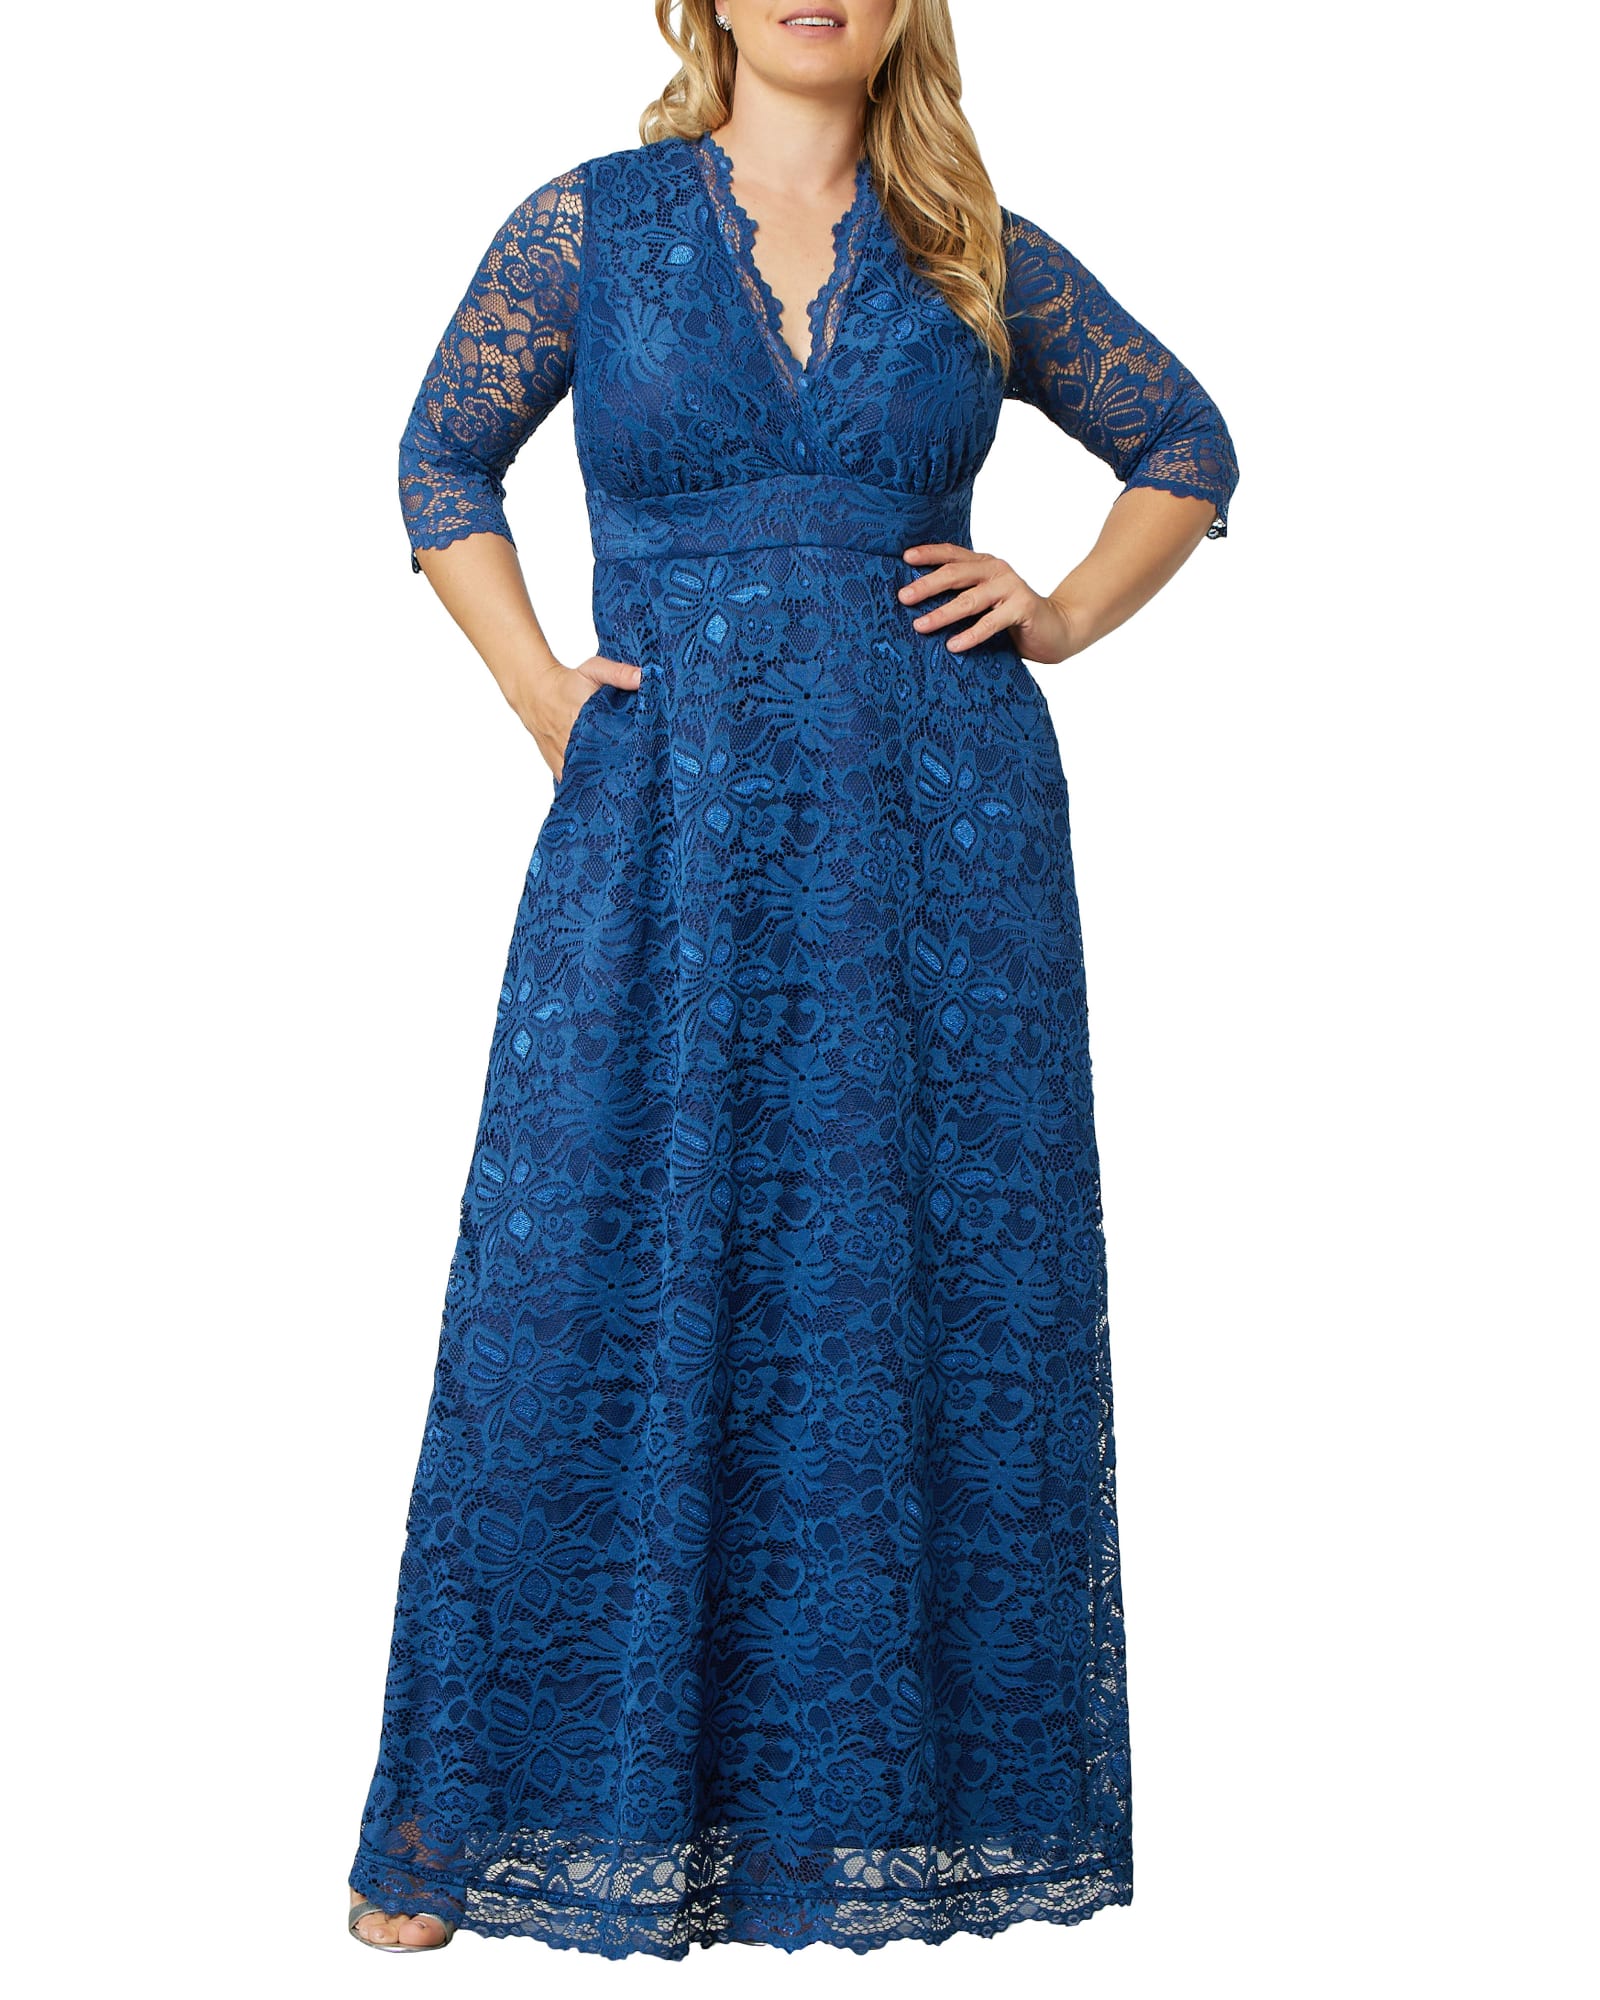 Plus Size Lace Dresses For Special Occasions